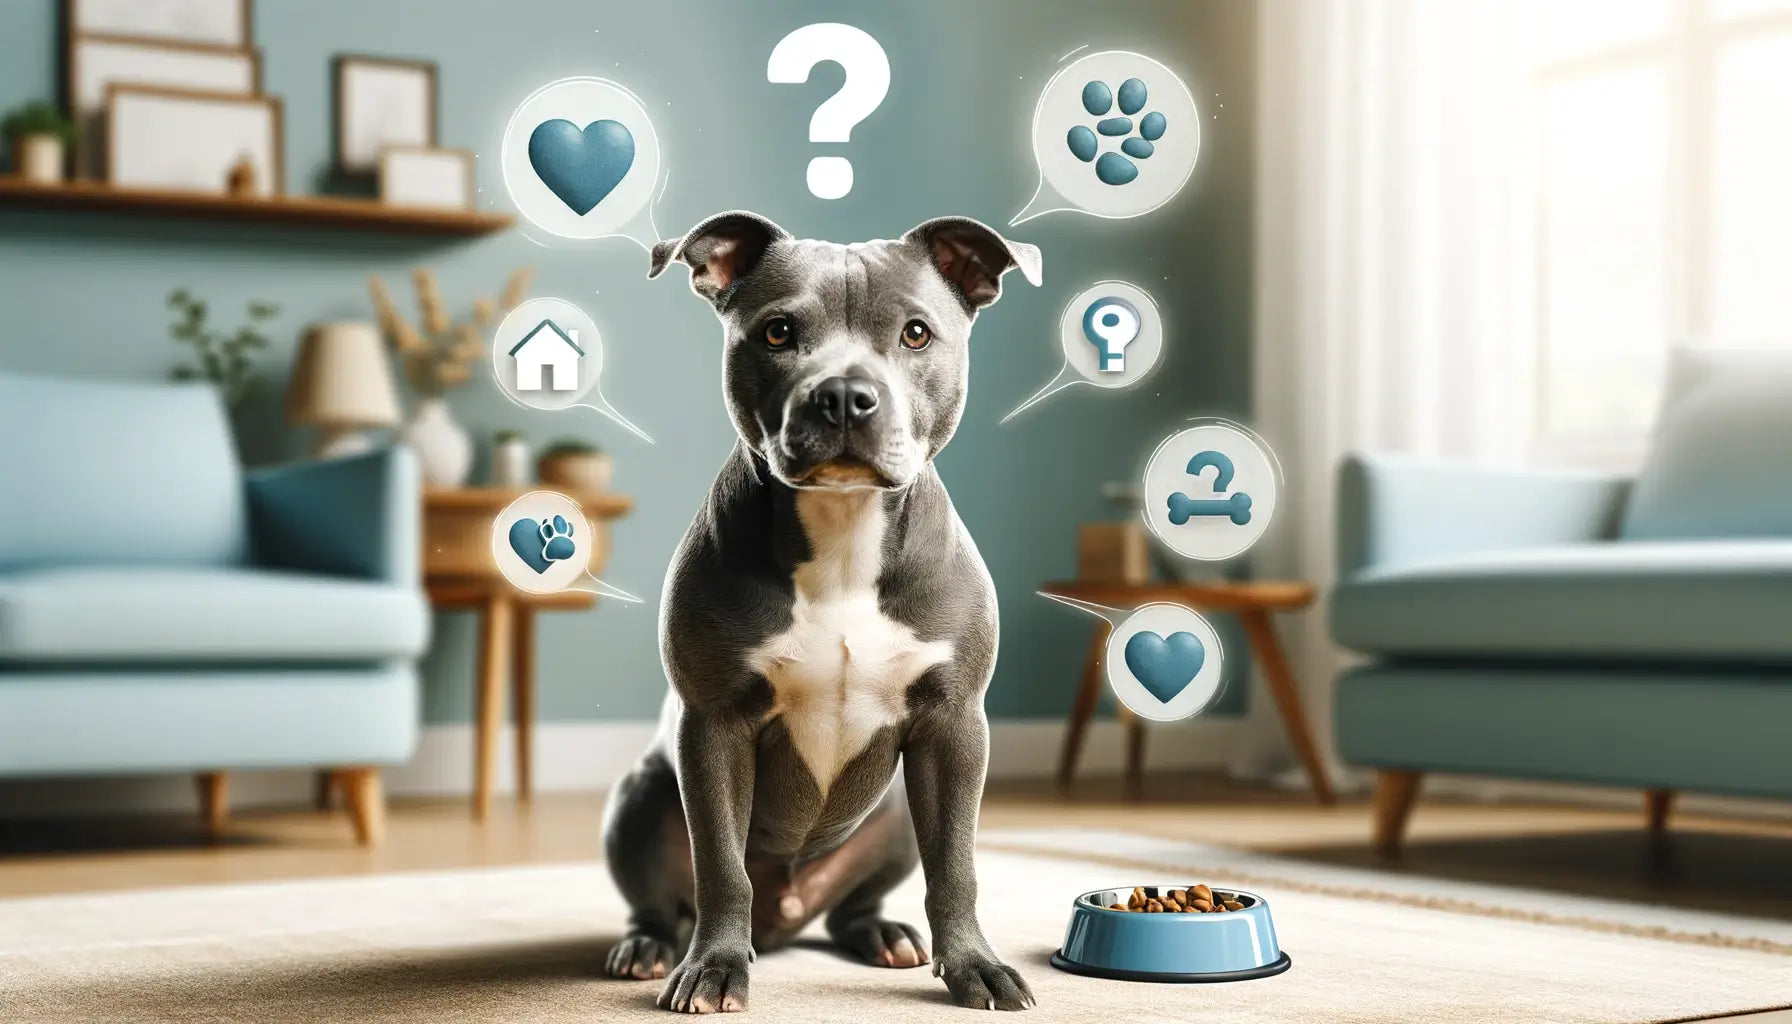 Blue Staffy with a question mark above its head, symbolizing frequently asked questions about the breed.